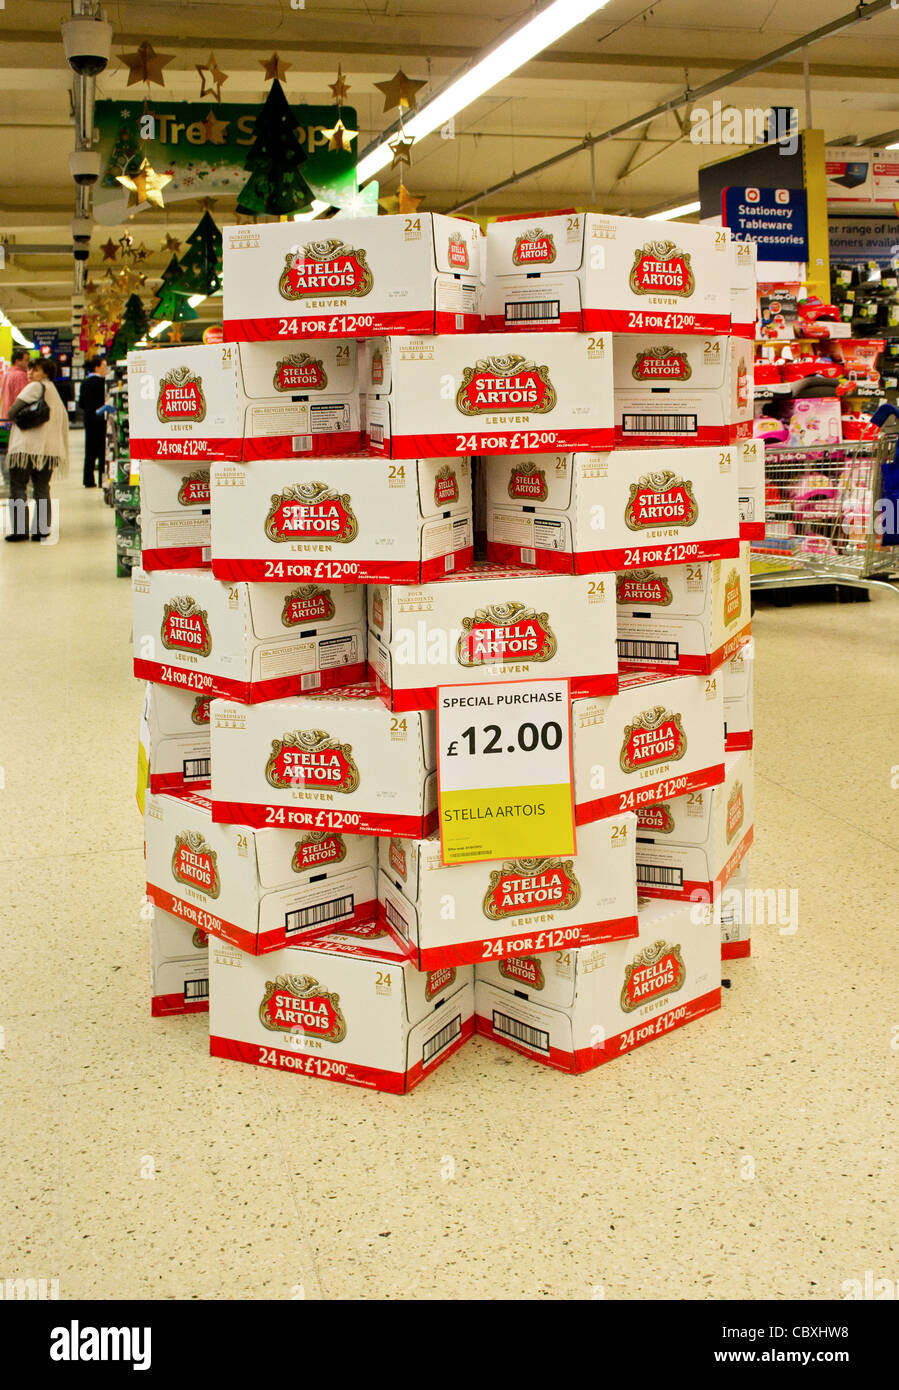 a display of Stella Artois beer in a Tesco supermarket, UK Stock Photo